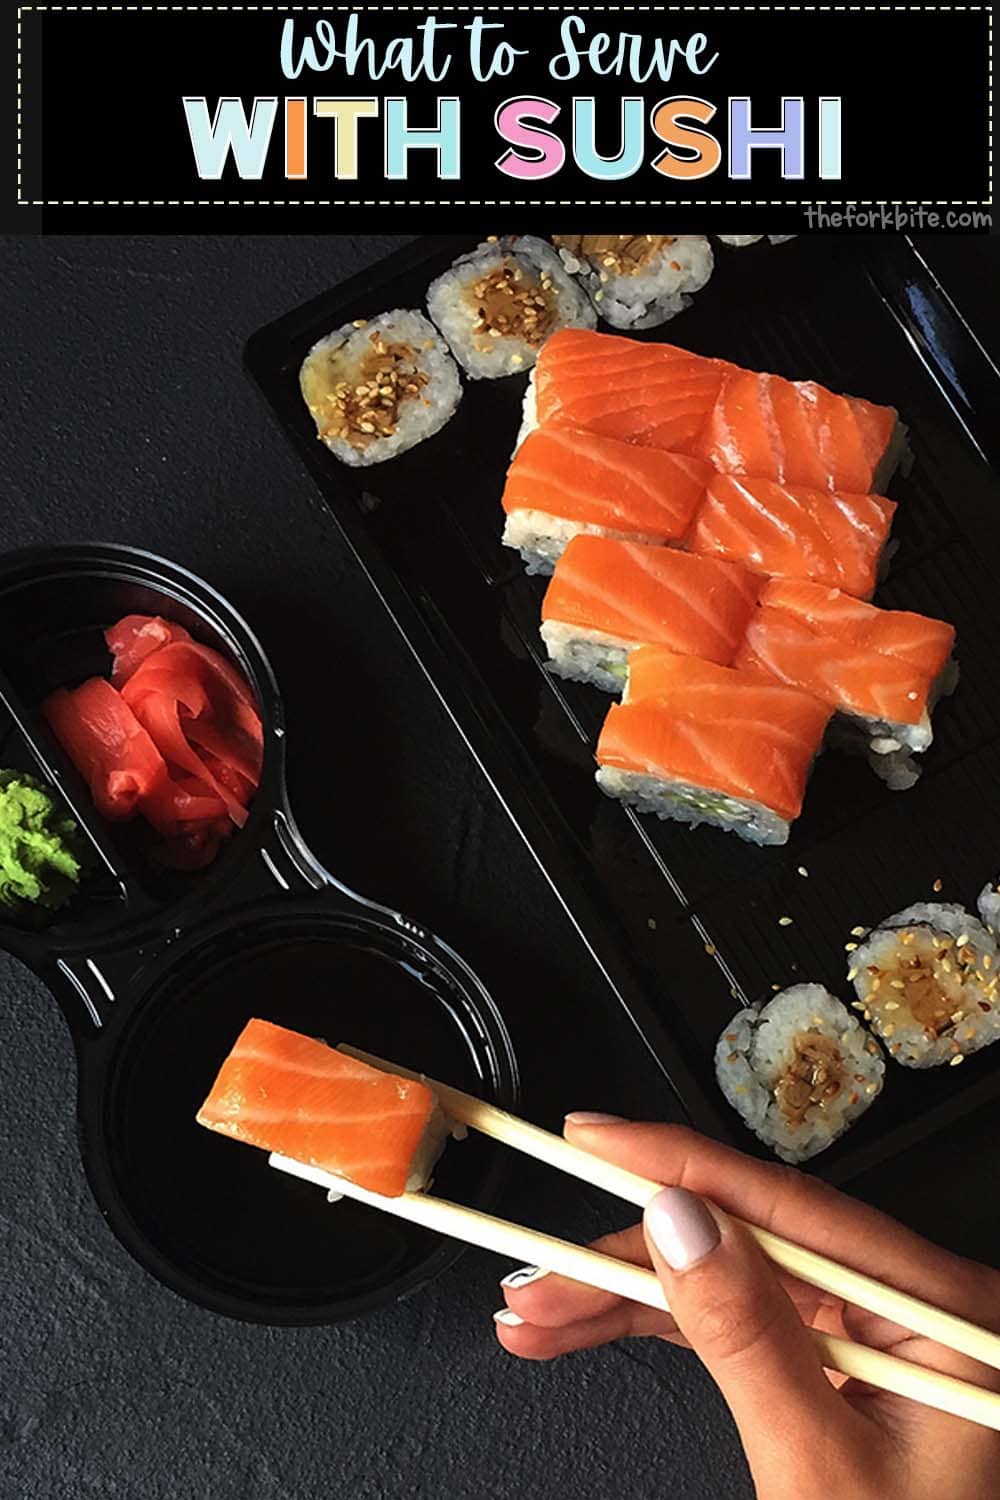 Elevate your sushi feast to the next level, here's a brief guide on the best side dishes to accompany your handmade sushi.